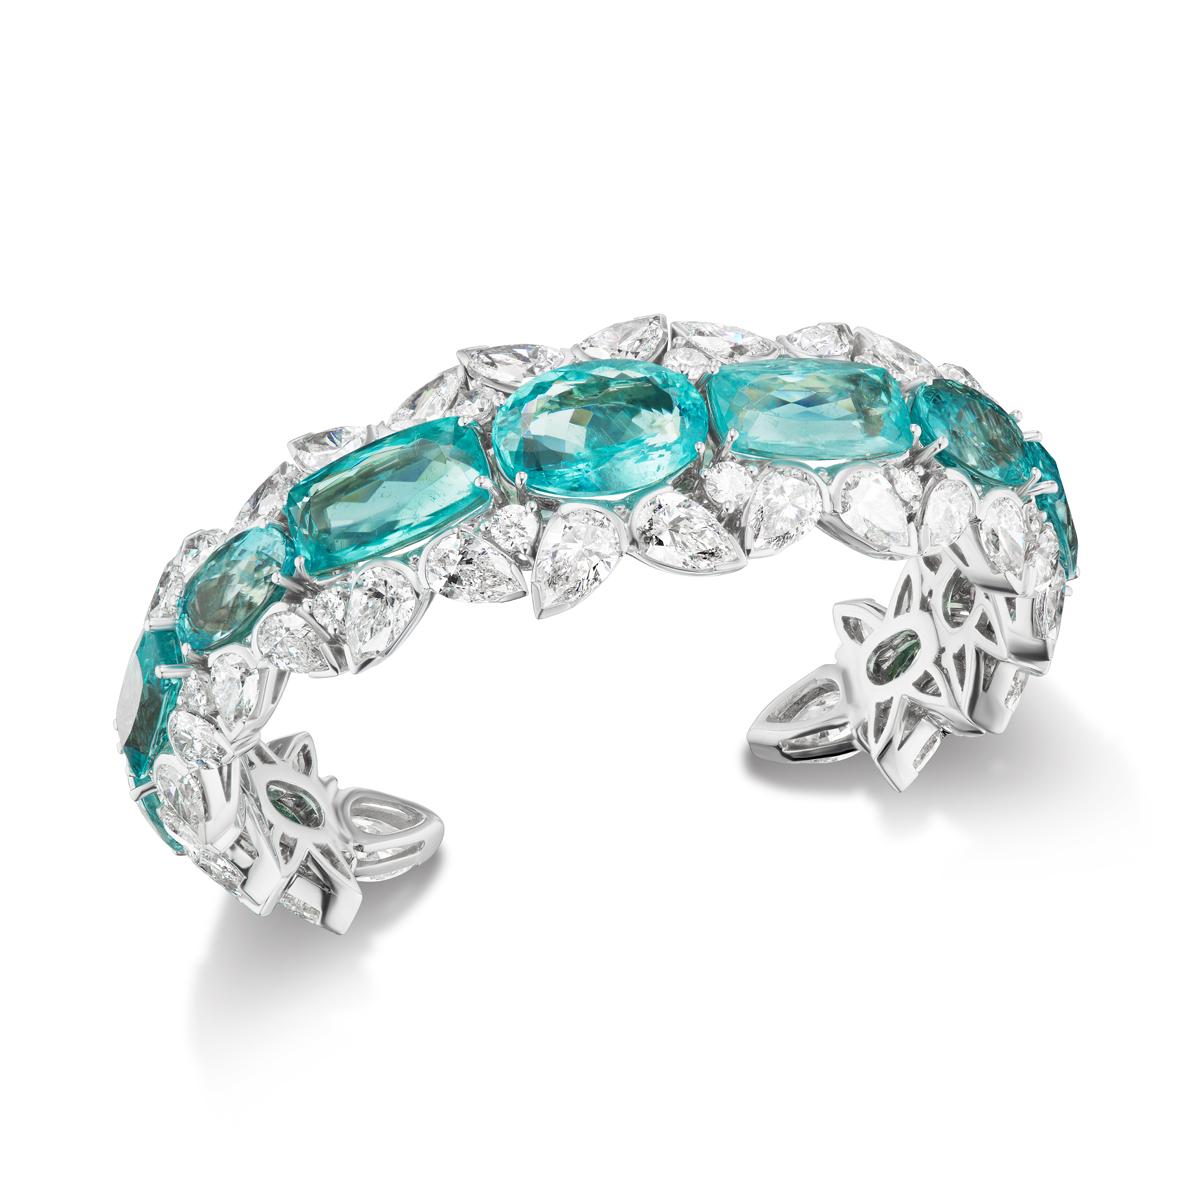 BEAUTIFUL PARAIBA AND DIAMOND BRACELET BY RAYAZTAKAT
A gorgeous Neon Blue Mozambique Paraiba Tourmaline gets the sweetheart treatment with a simple diamond setting. Pariba is certified by GIA Lab.
 
Item:	# 03695
Setting:	18K W
Lab:	GIA
Color